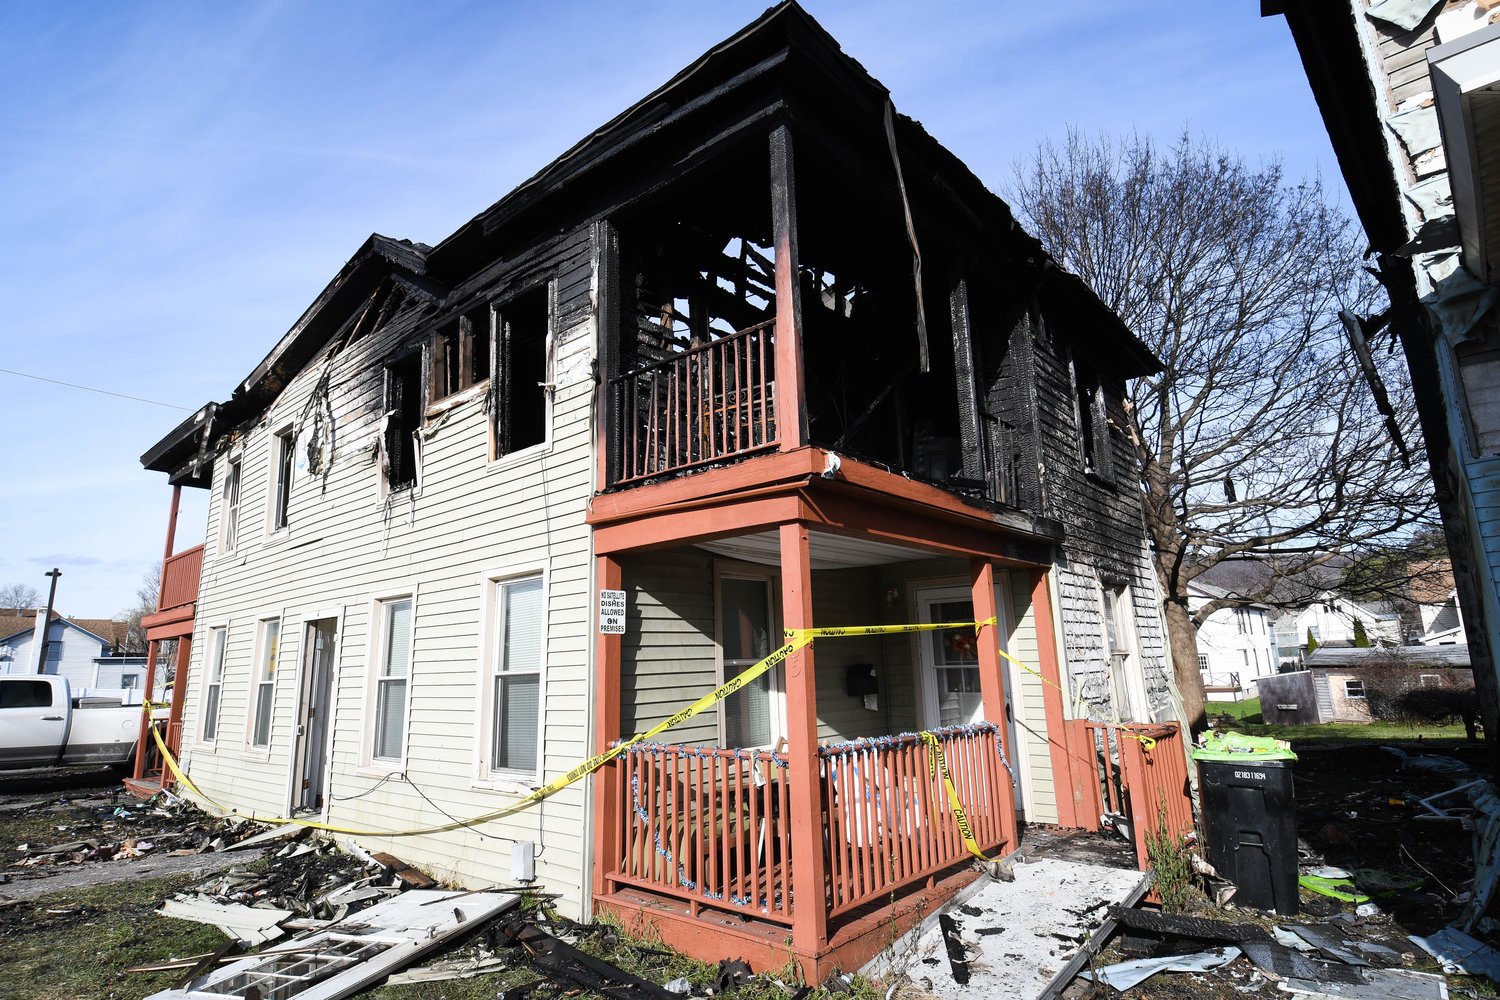 One of two homes heavily damaged by fire on East Clark Street in Ilion Monday evening. A total of 13 people — nine adults and four children — have been displaced from their homes. Fire officials said no one was injured.